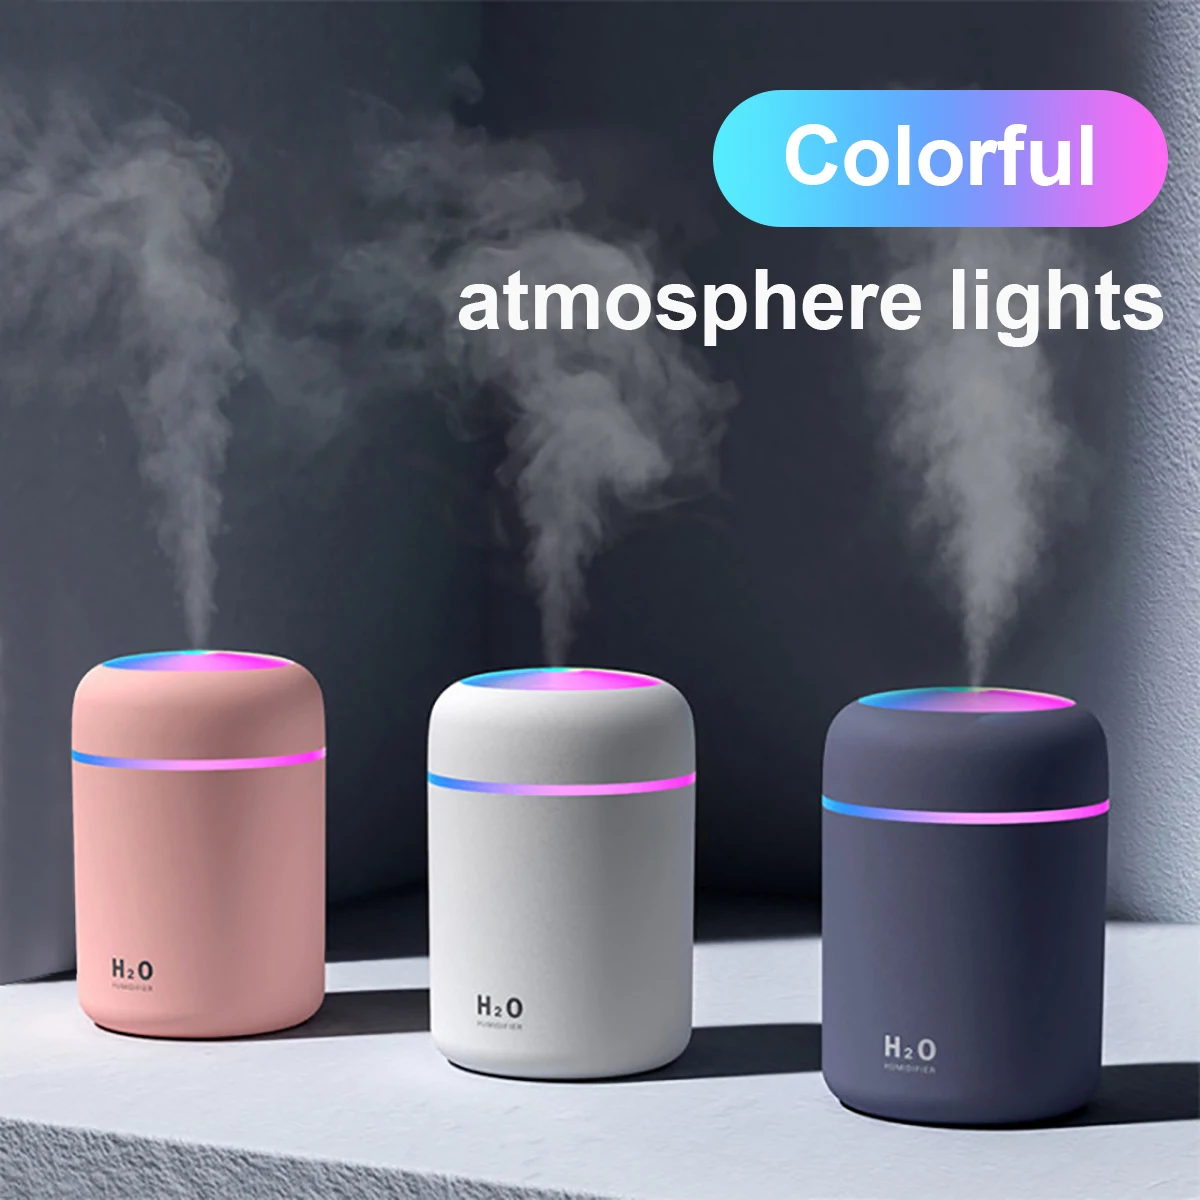 

300ml Portable Car USB Air Humidifier Colorful Aroma Fog Diffuser Househeld Cool Mist Maker Humidifier Purifier for car home